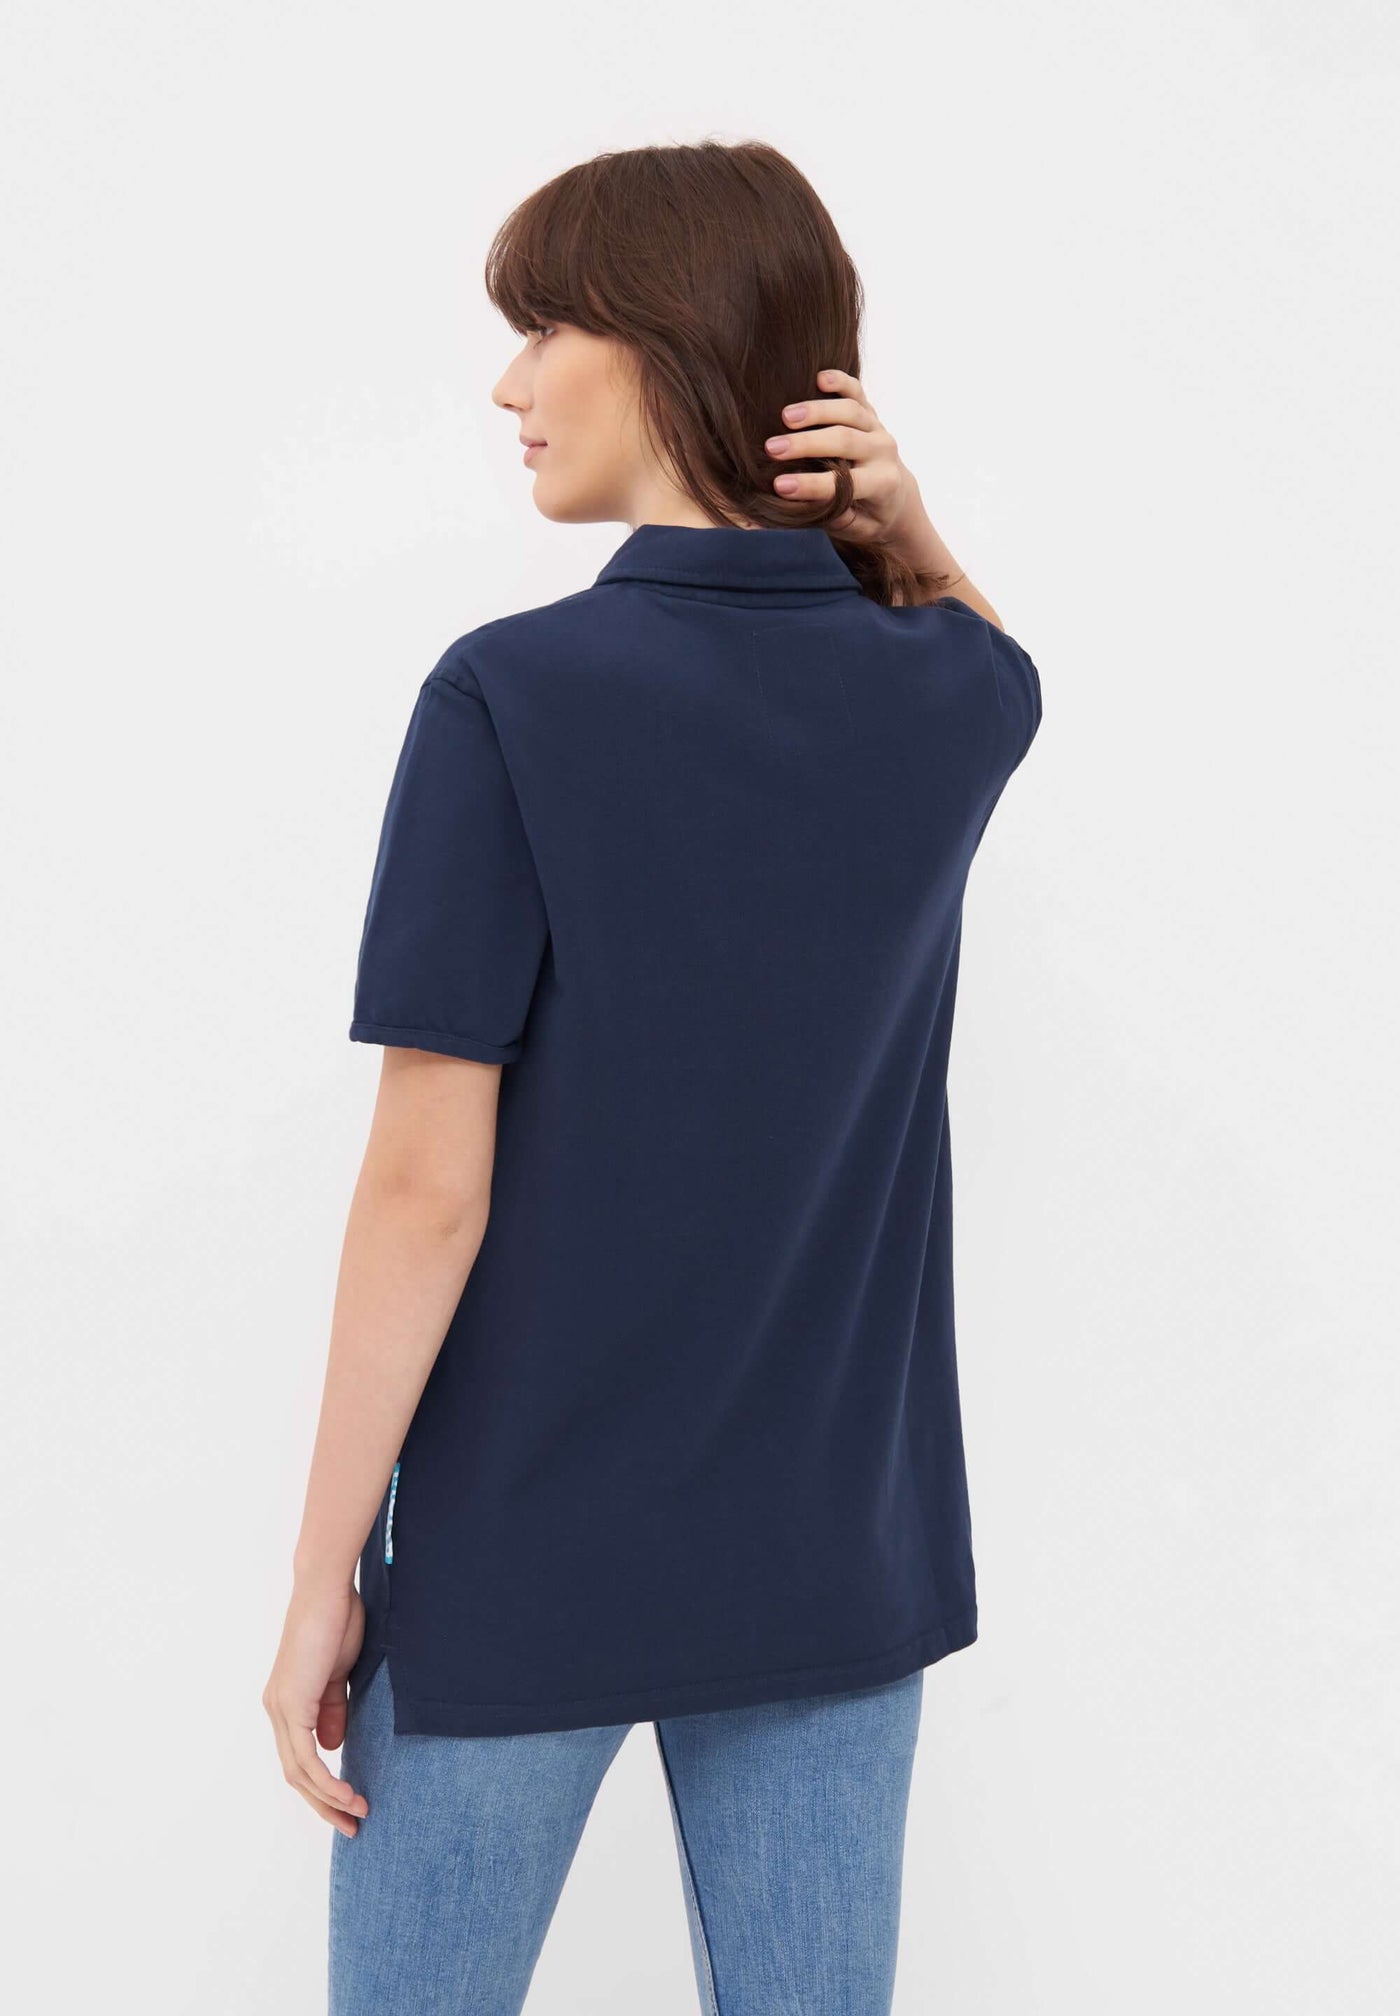 MBRC UNISEX SUSTAINABLE BLUE OCEAN POLO "DARK BLUE LOGO" - BACK VIEW WOMAN